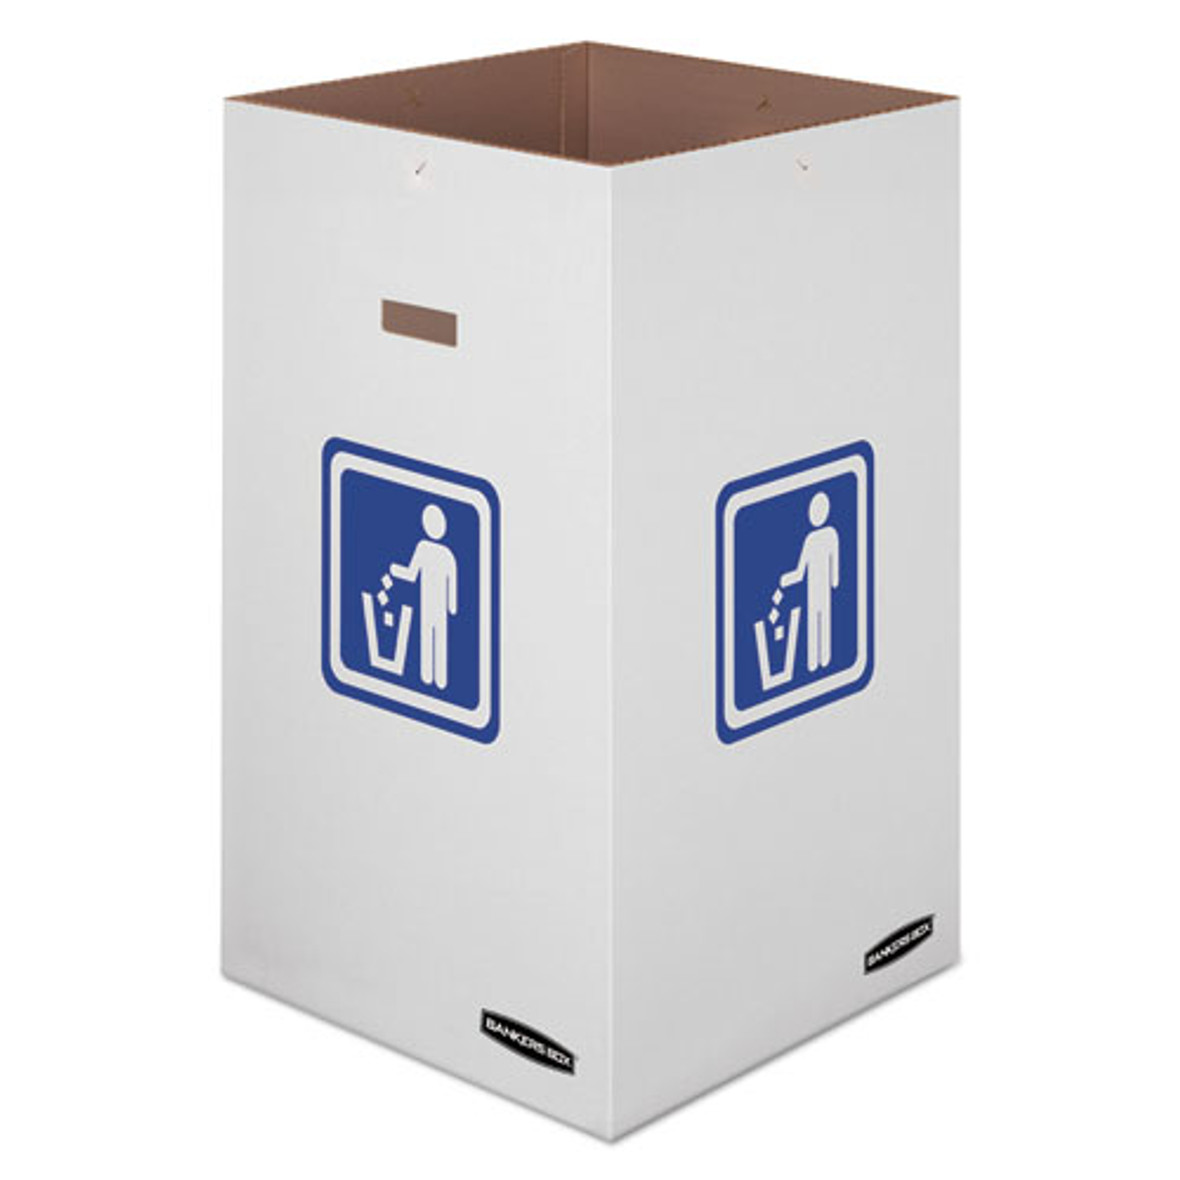 Bankers Box Waste and Recycling Bin, 42 gal, White, 10/Carton